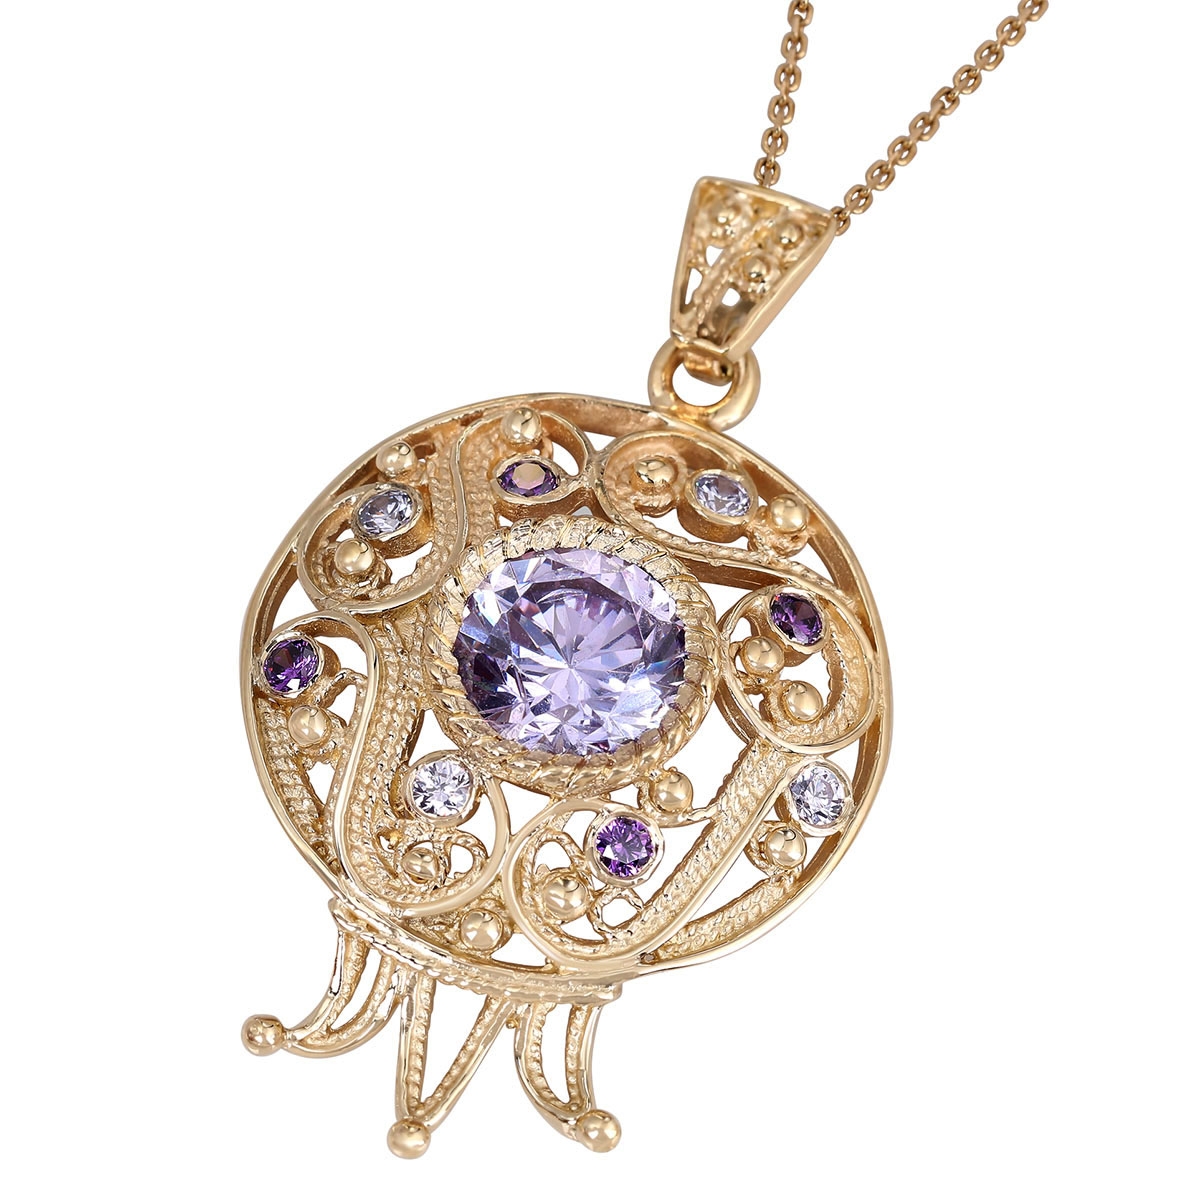 Rafael Jewelry 14K Gold Filigree Pomegranate Necklace with Amethysts  - 1